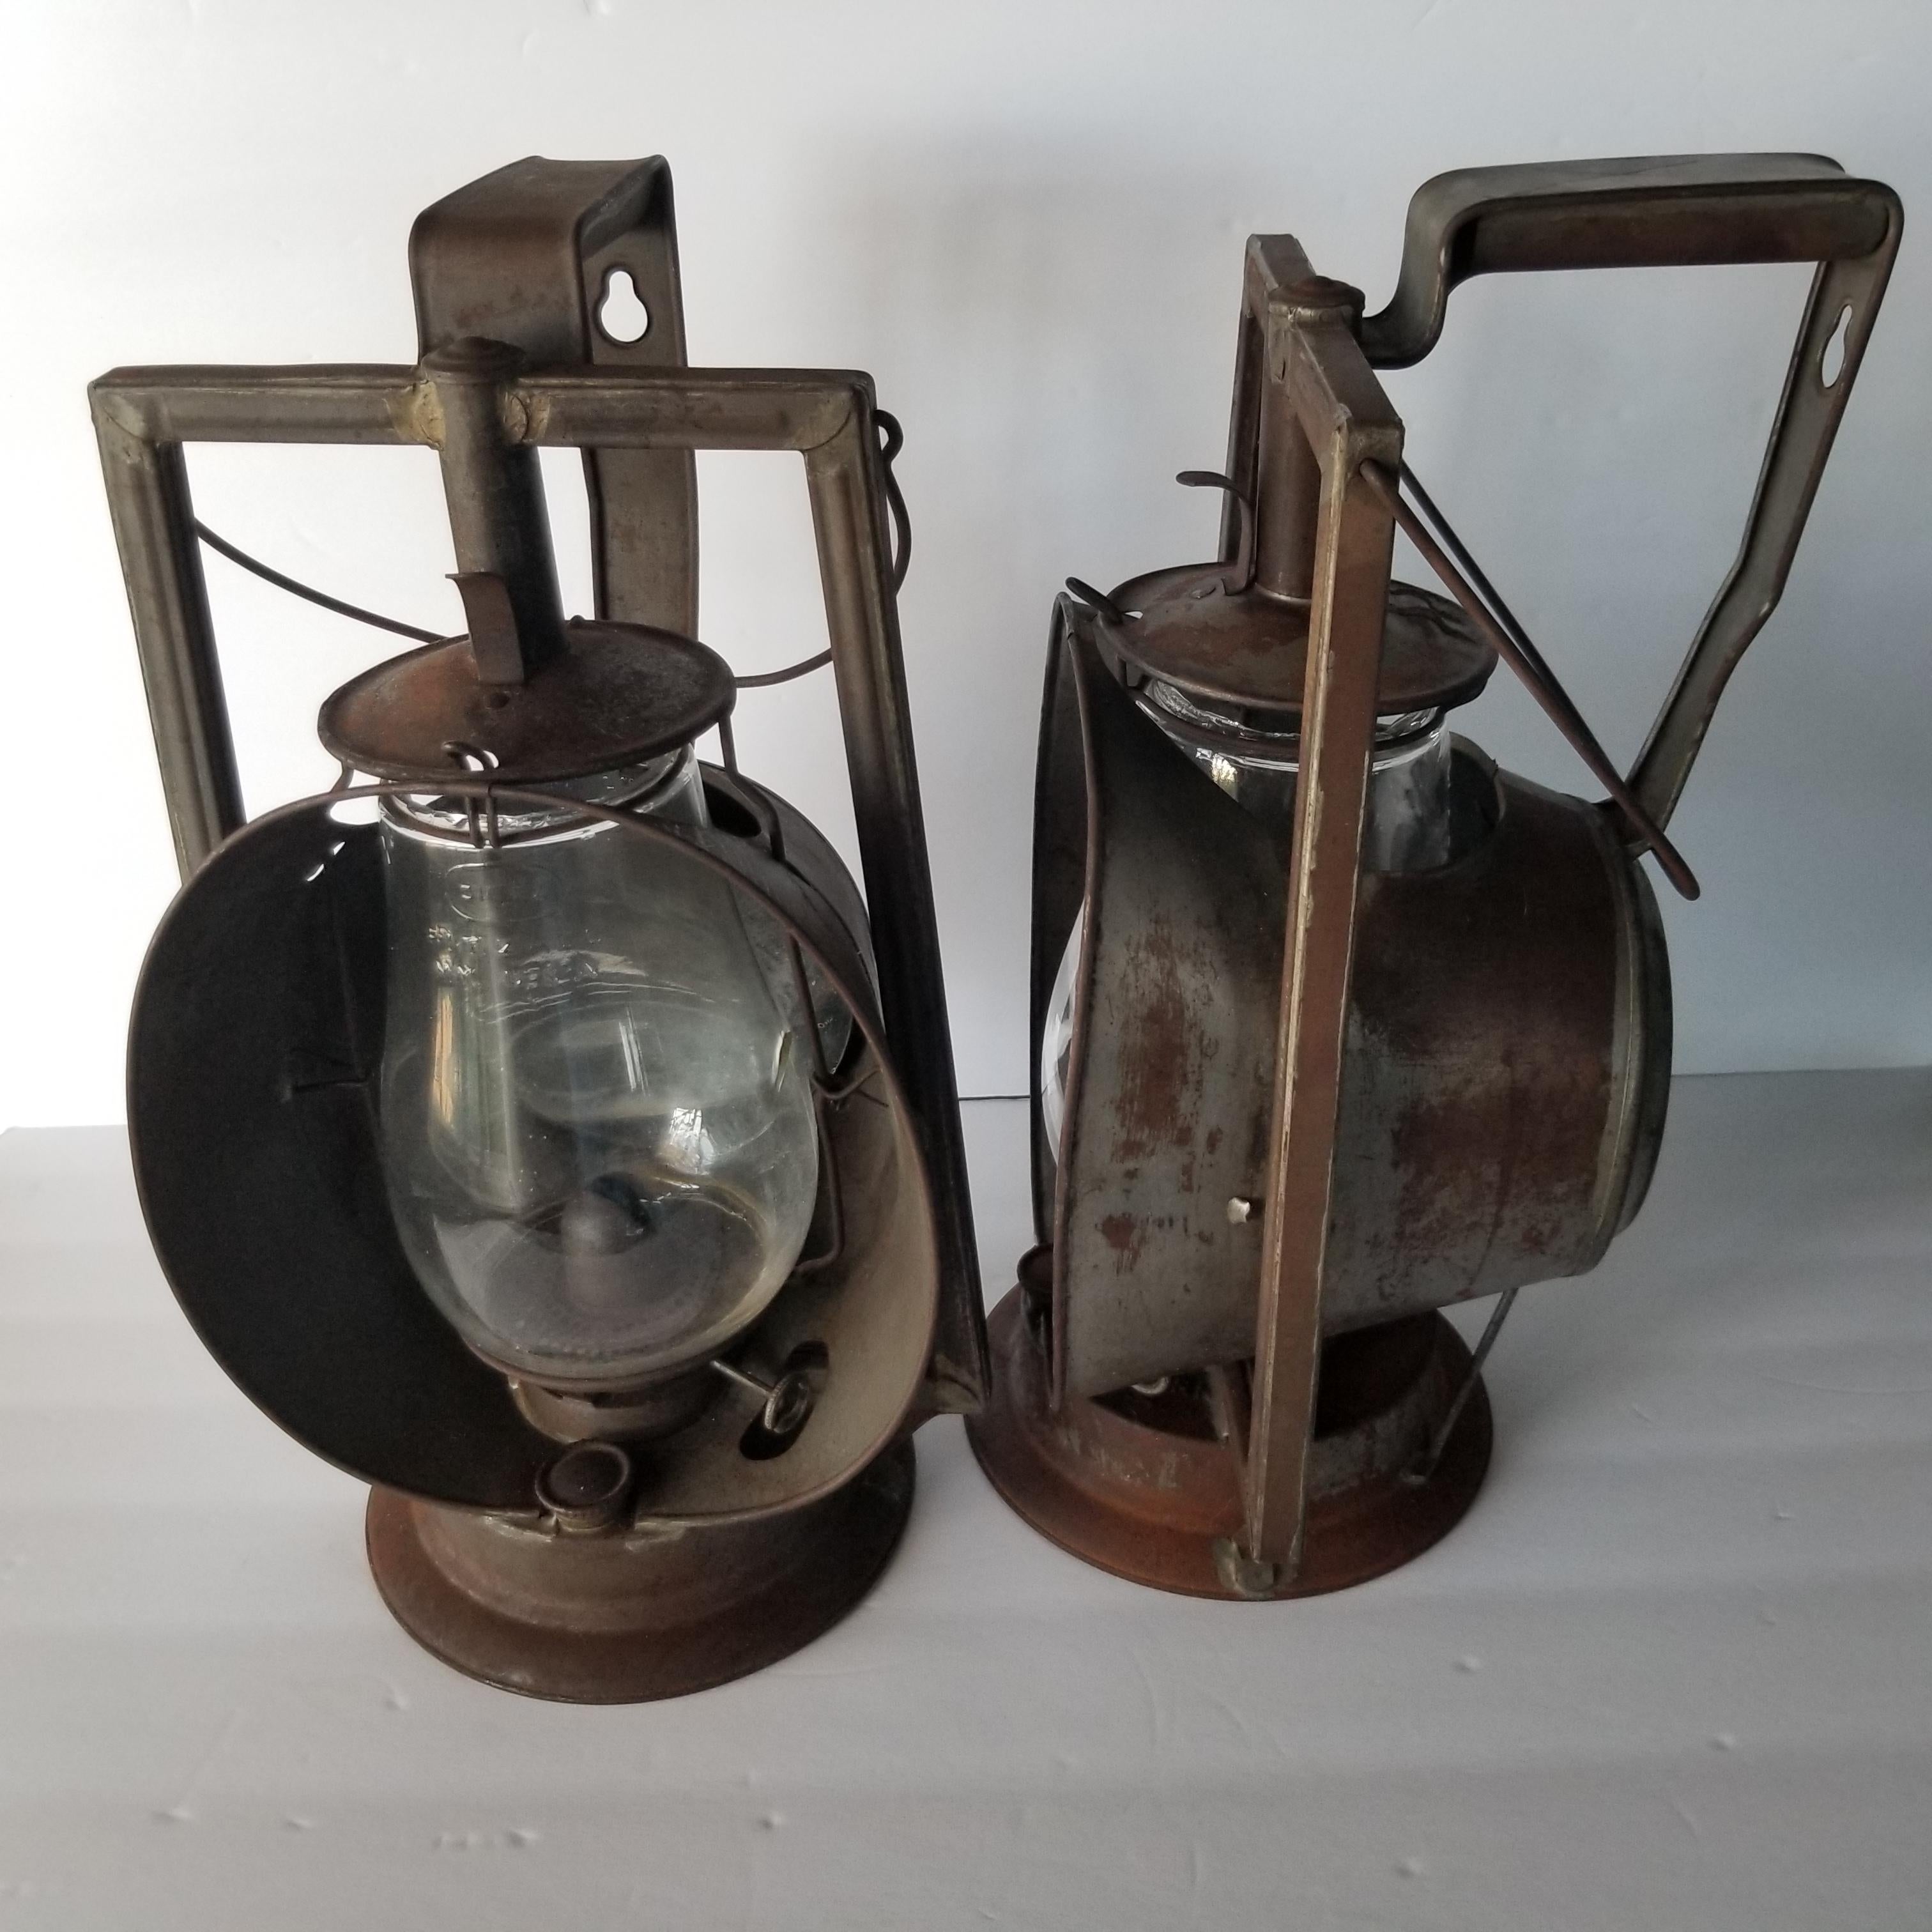 Industrial Antique Dietz Acme Large Inspector Lamp Two Railroad Lanterns New York 1900s